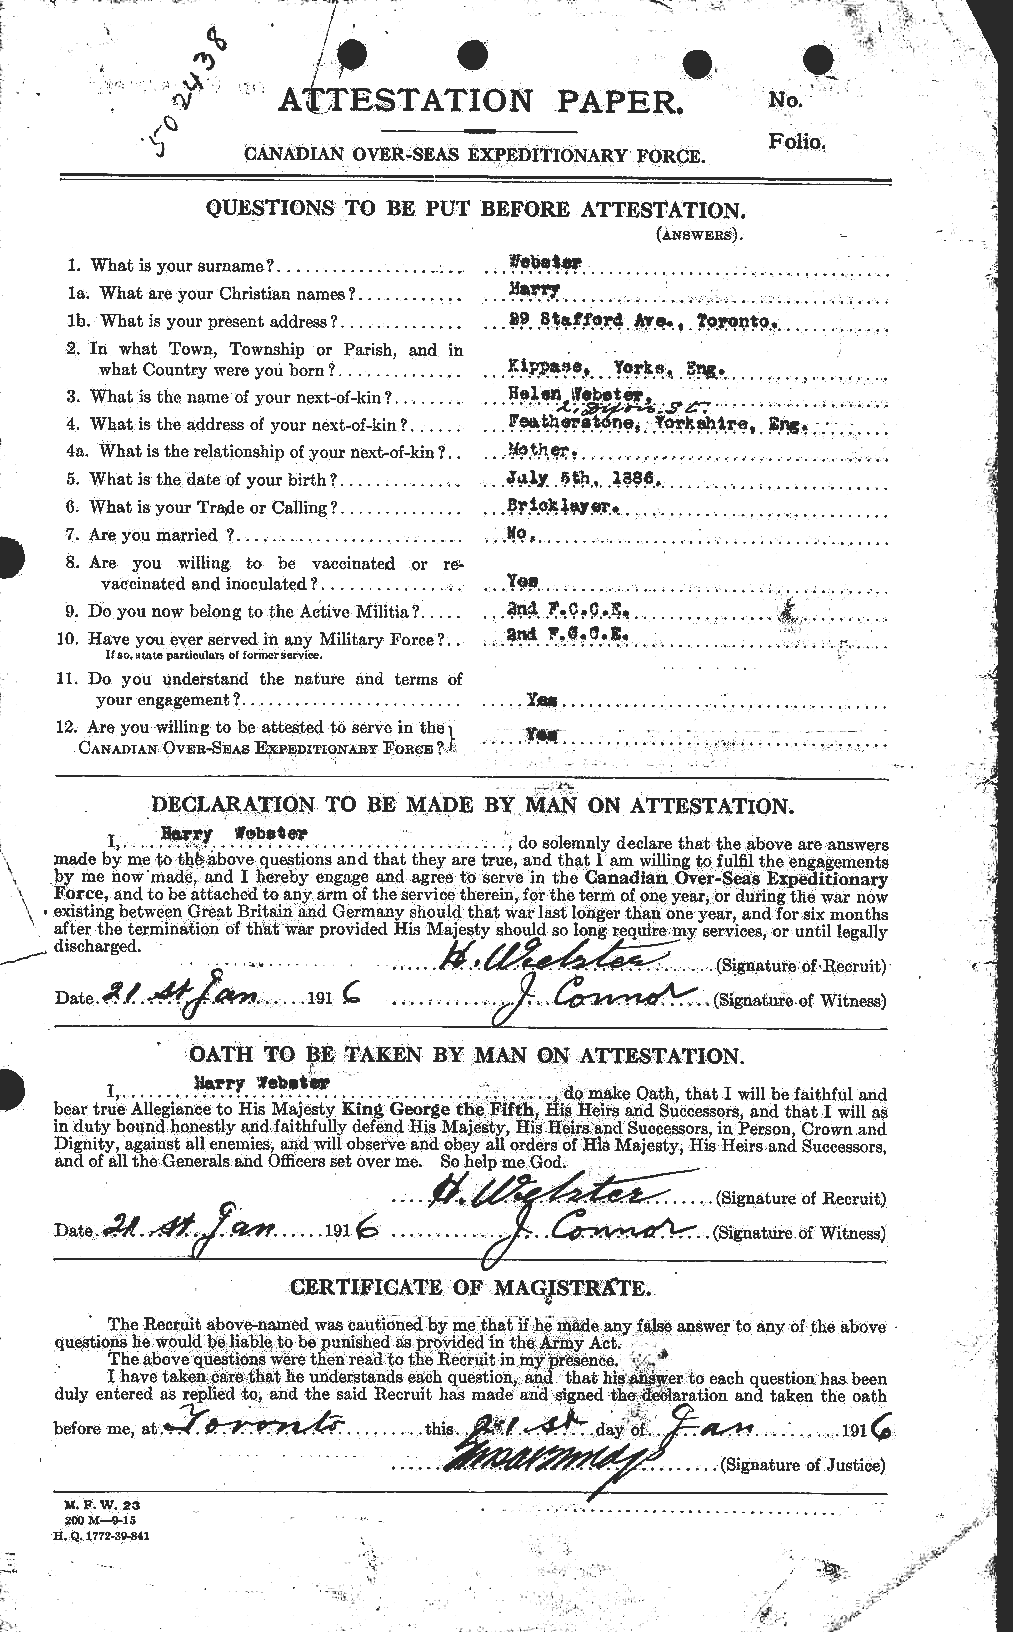 Personnel Records of the First World War - CEF 670411a